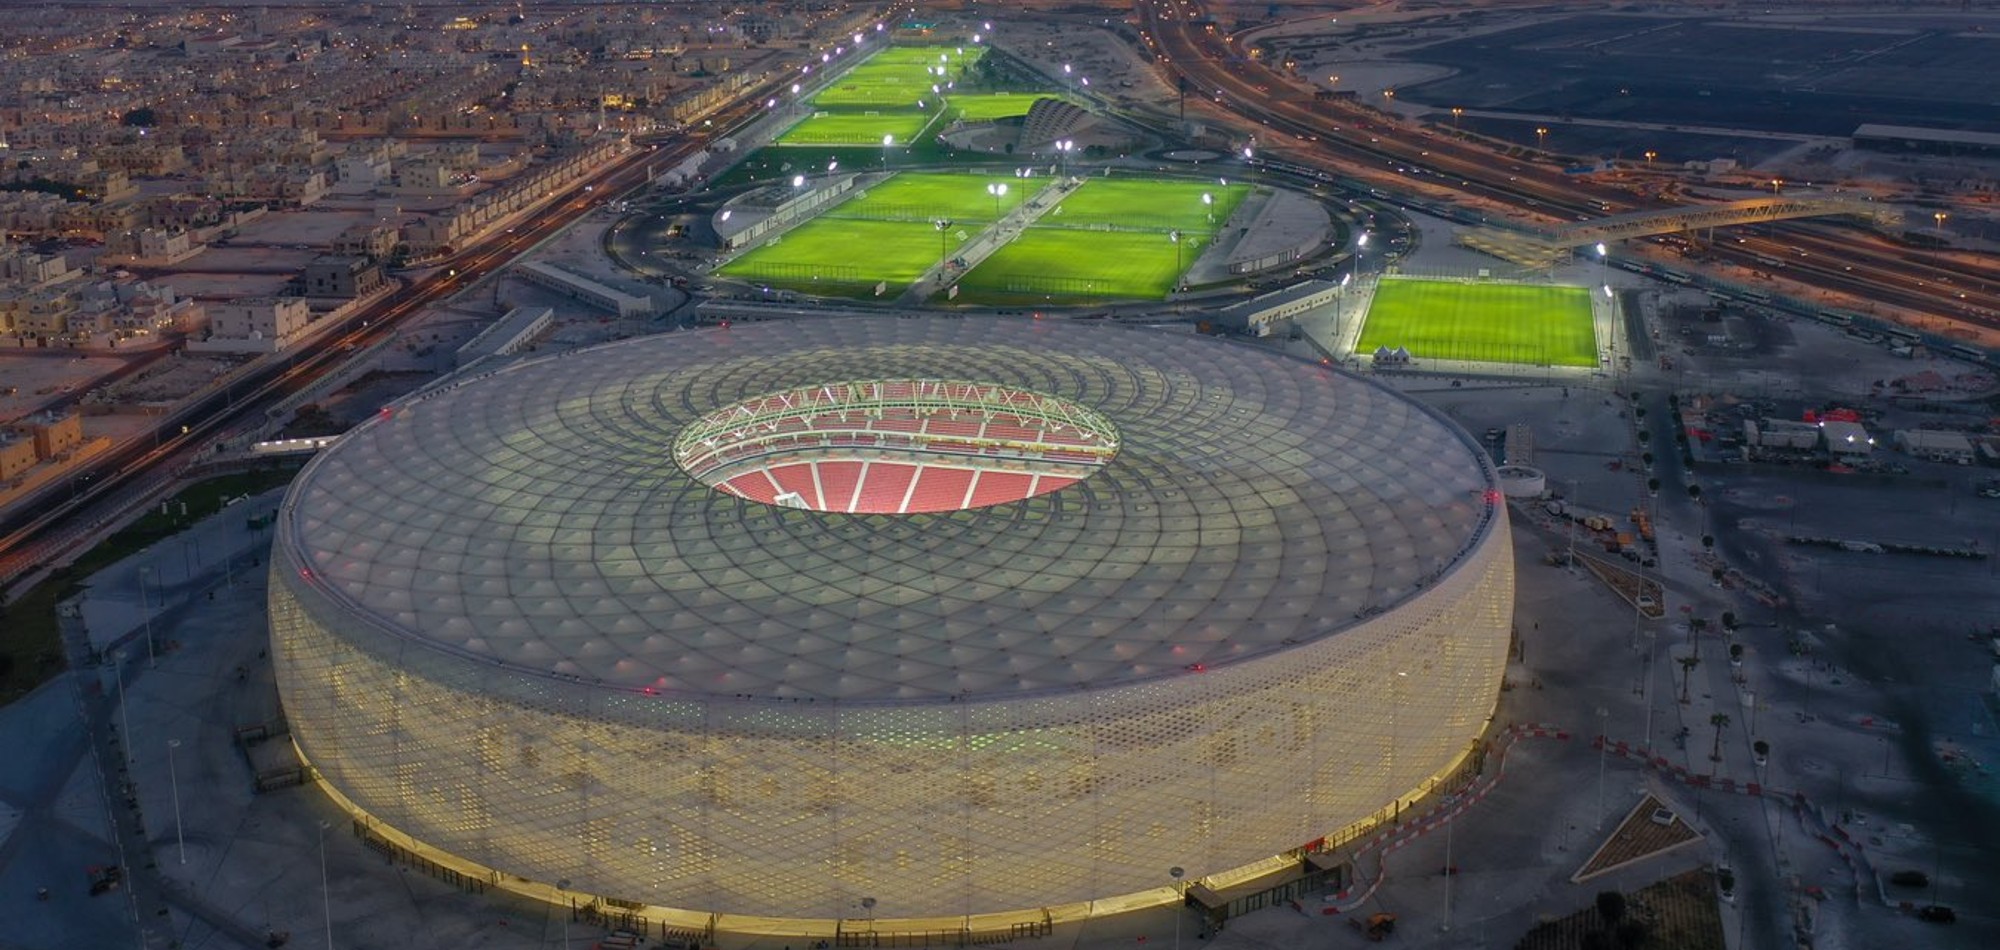 Key information for fans attending Amir Cup Final at Al Thumama Stadium